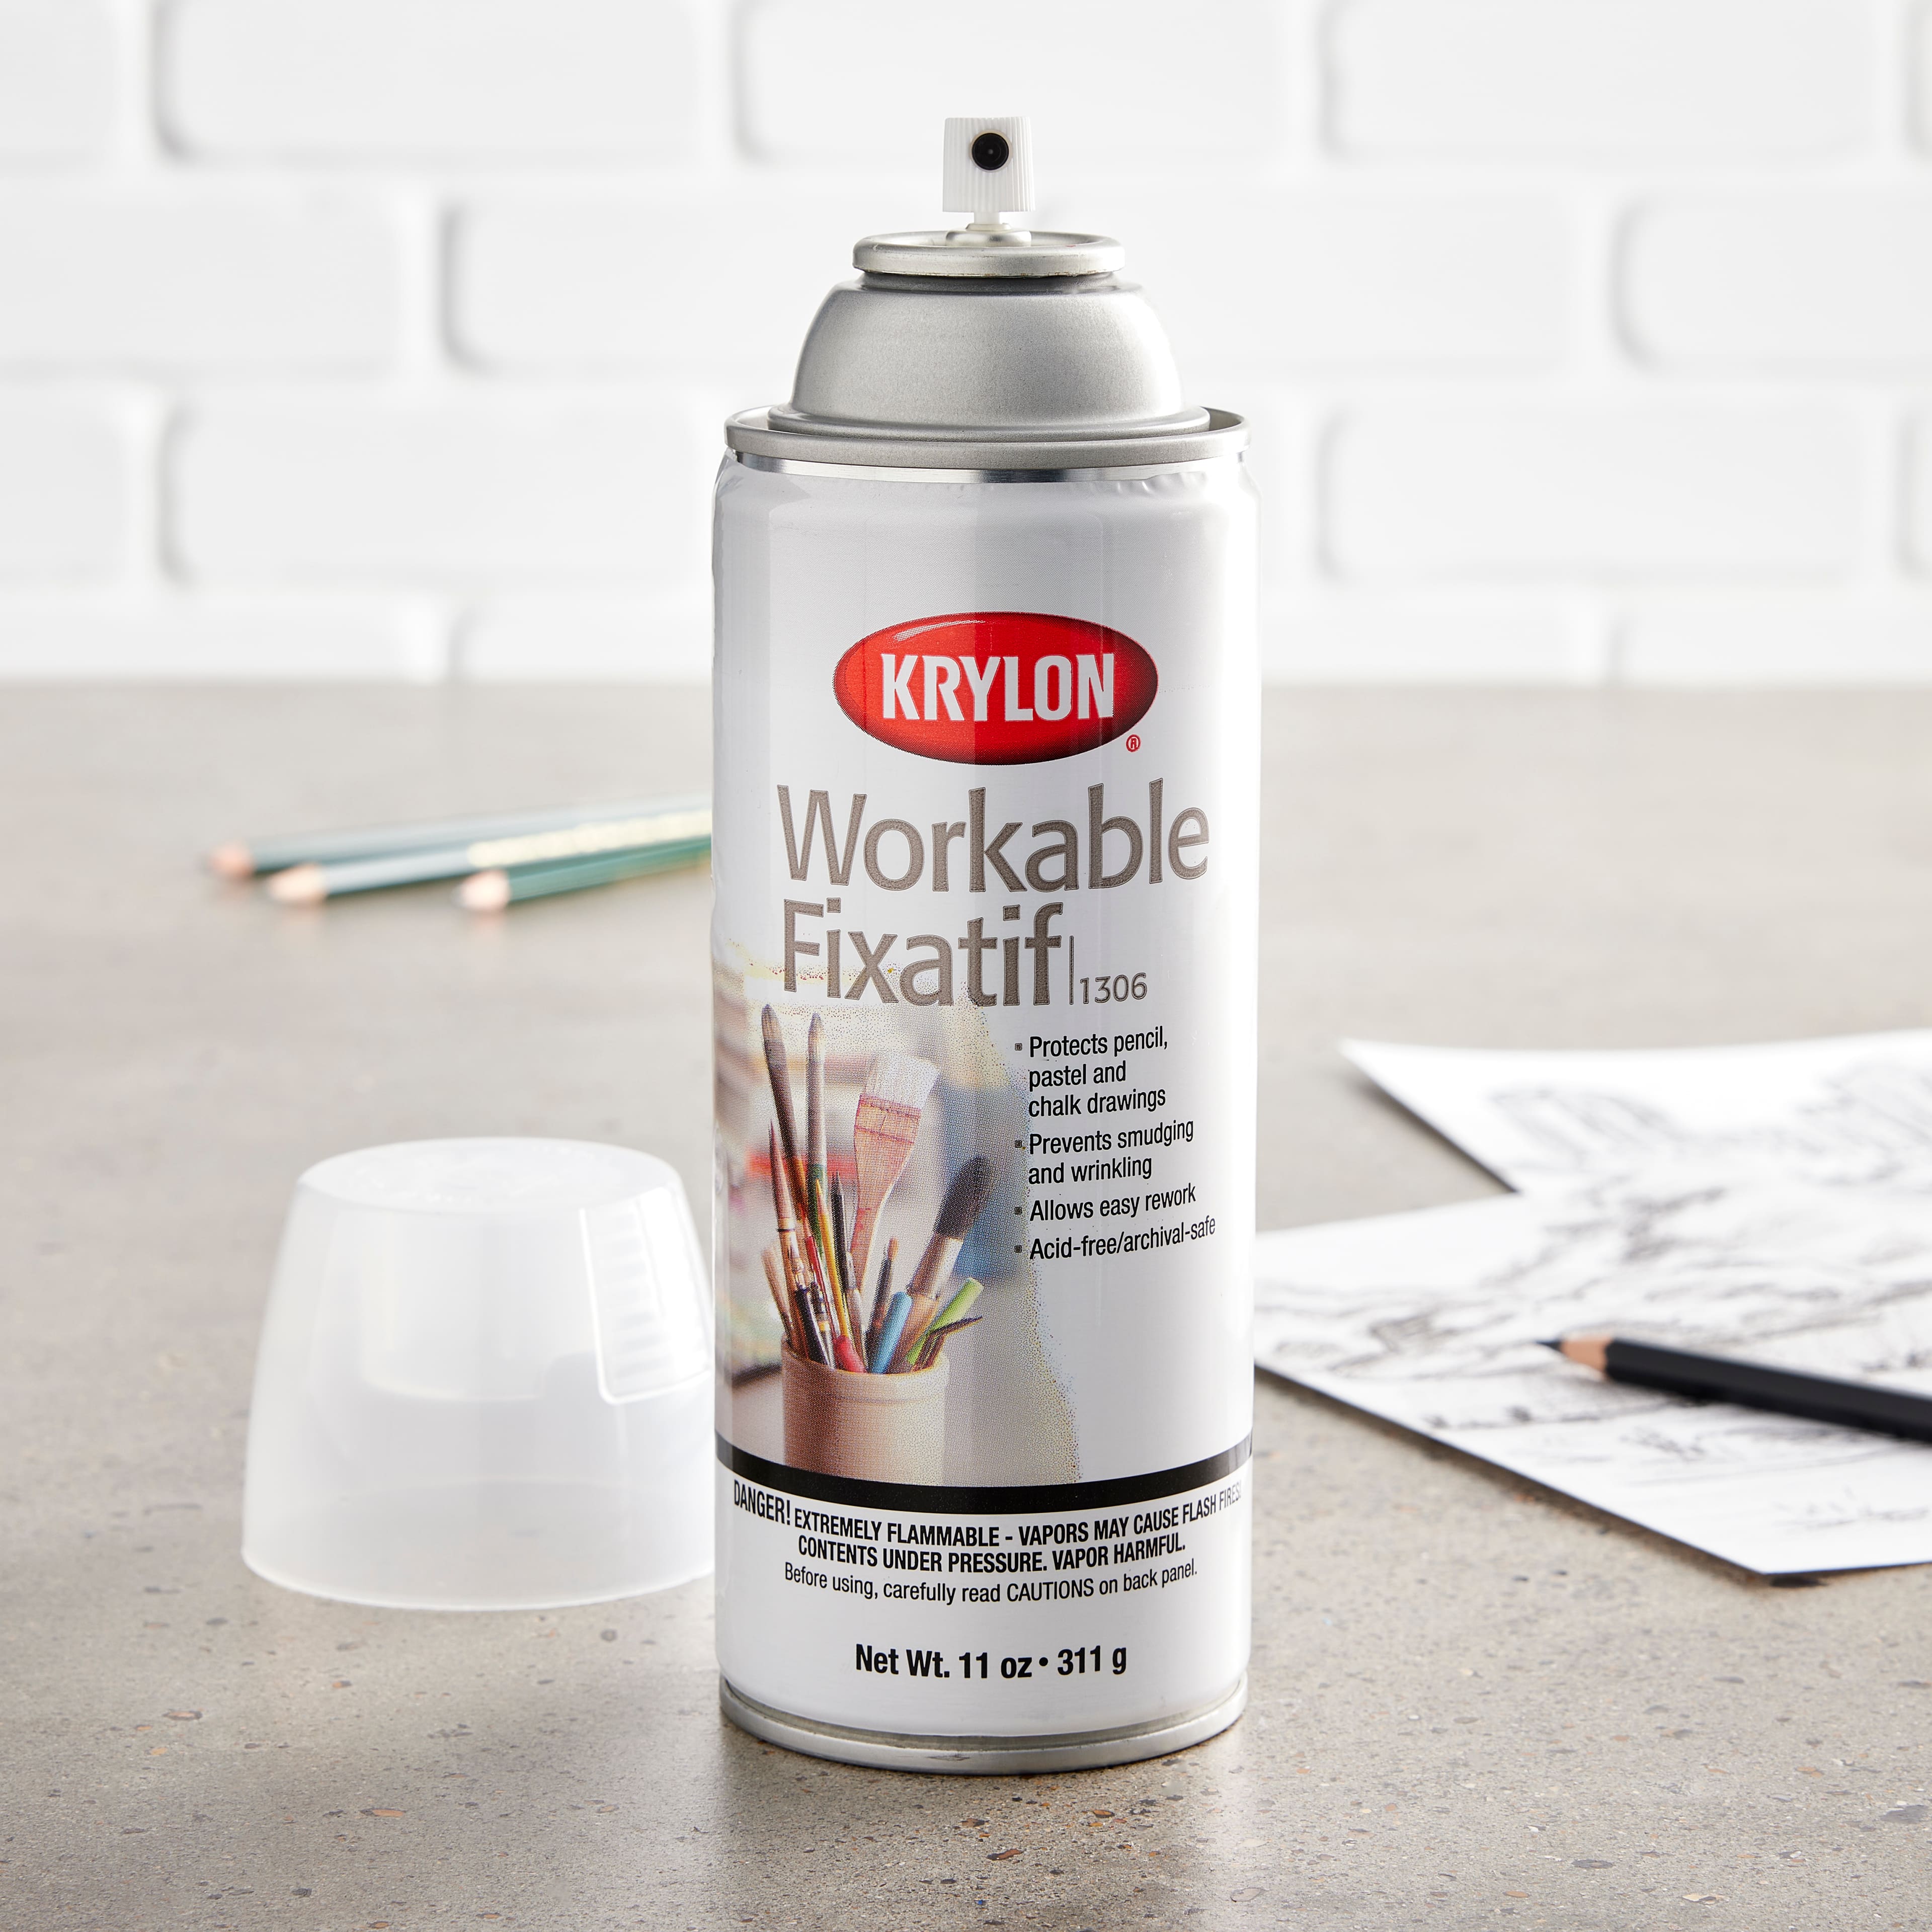 Does anyone know if krylon workable fixatif works for doll